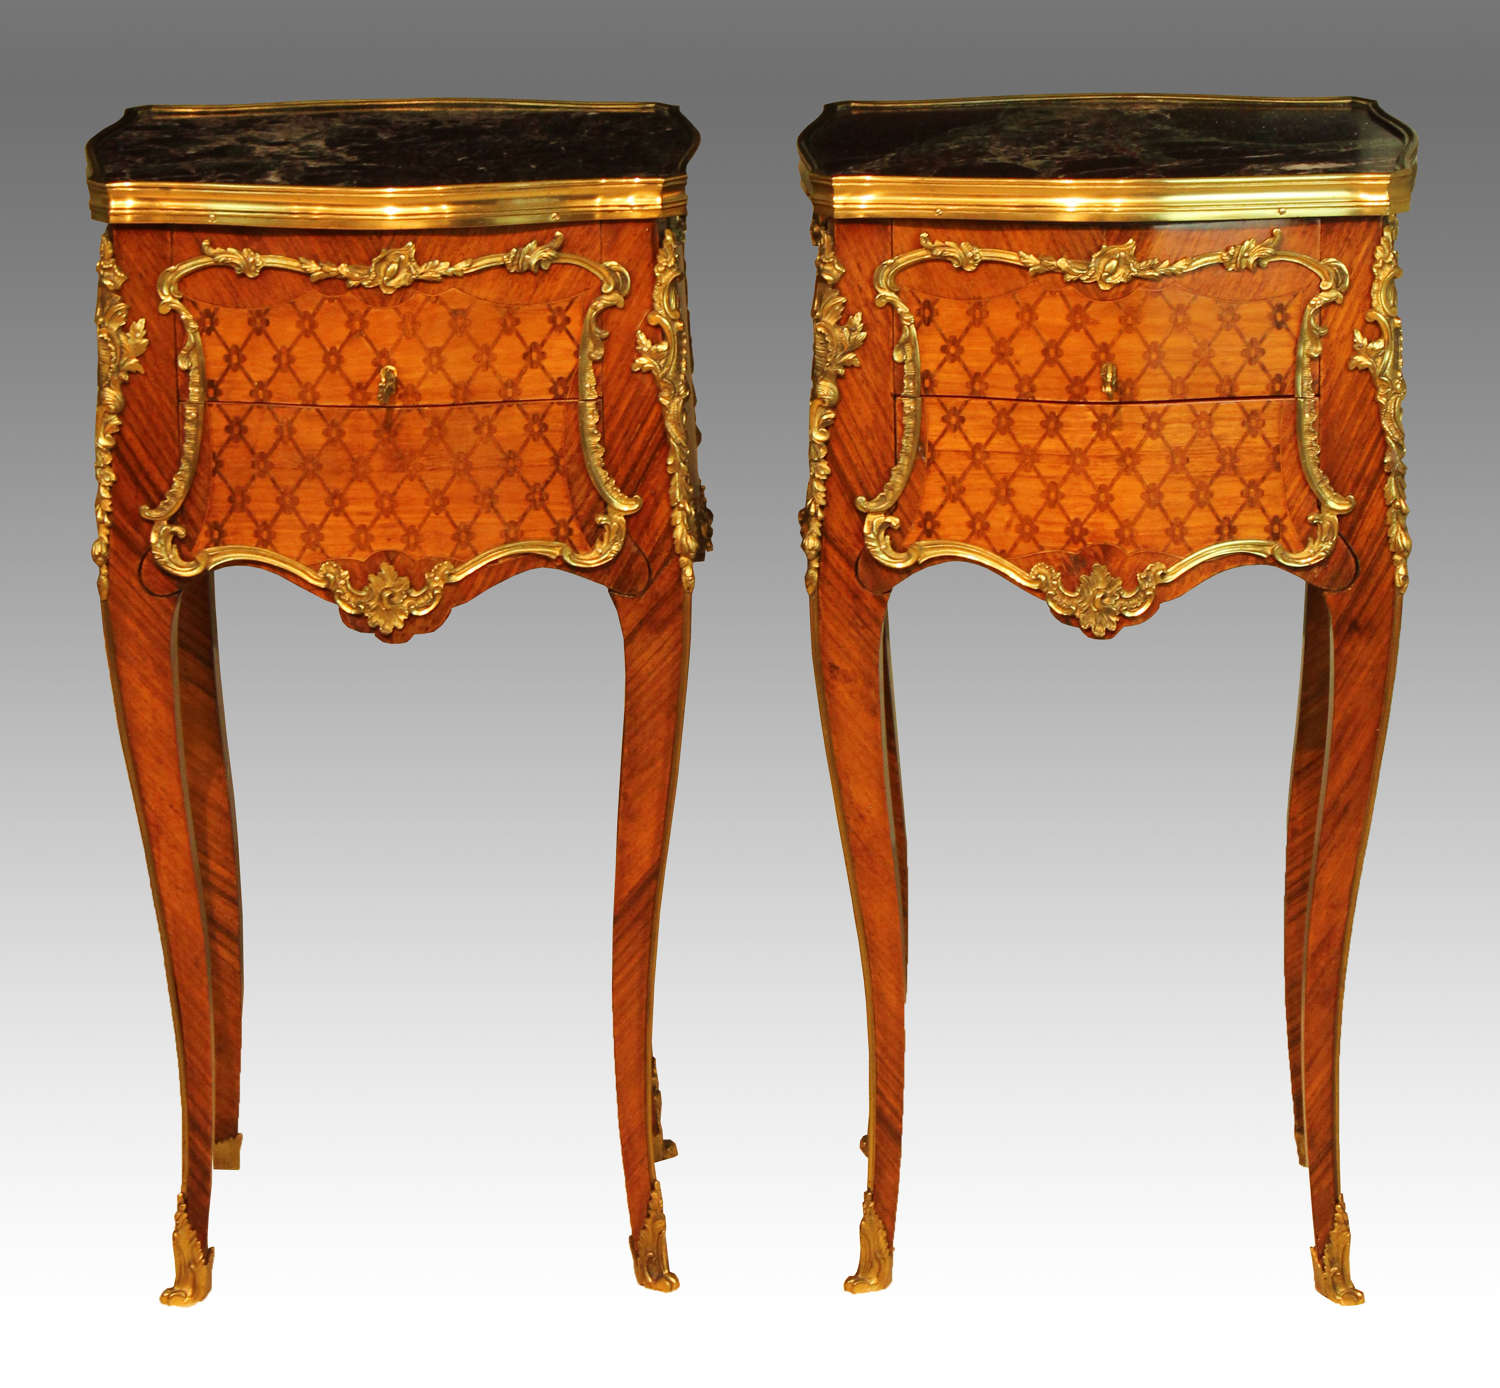 A Pair French Kingwood Inlaid & Ormolu mounted Bedside Tables